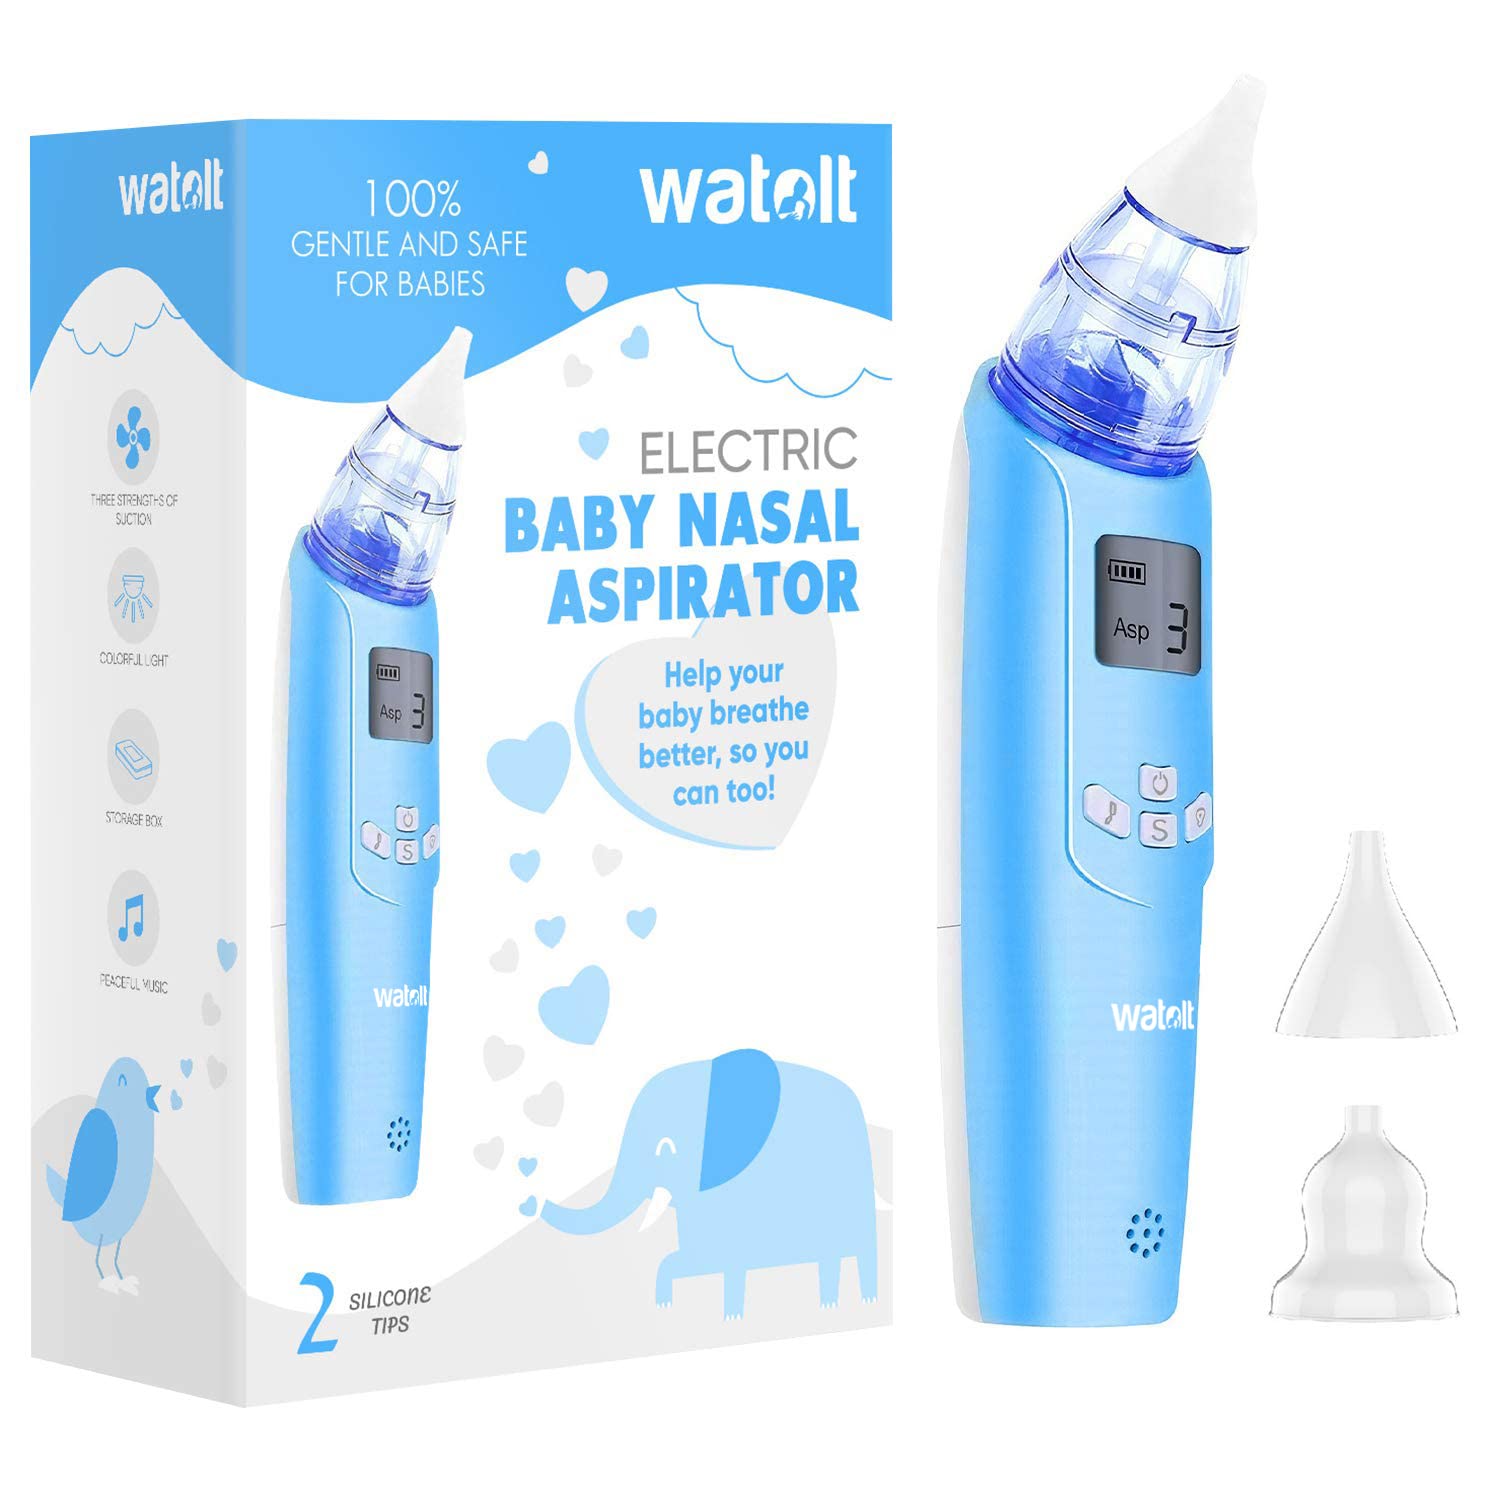 Baby Nasal Aspirator - Electric Nose Suction for Baby - Automatic Booger Sucker for Infants - Battery Powered Snot Mucus Remover for Kids Toddlers